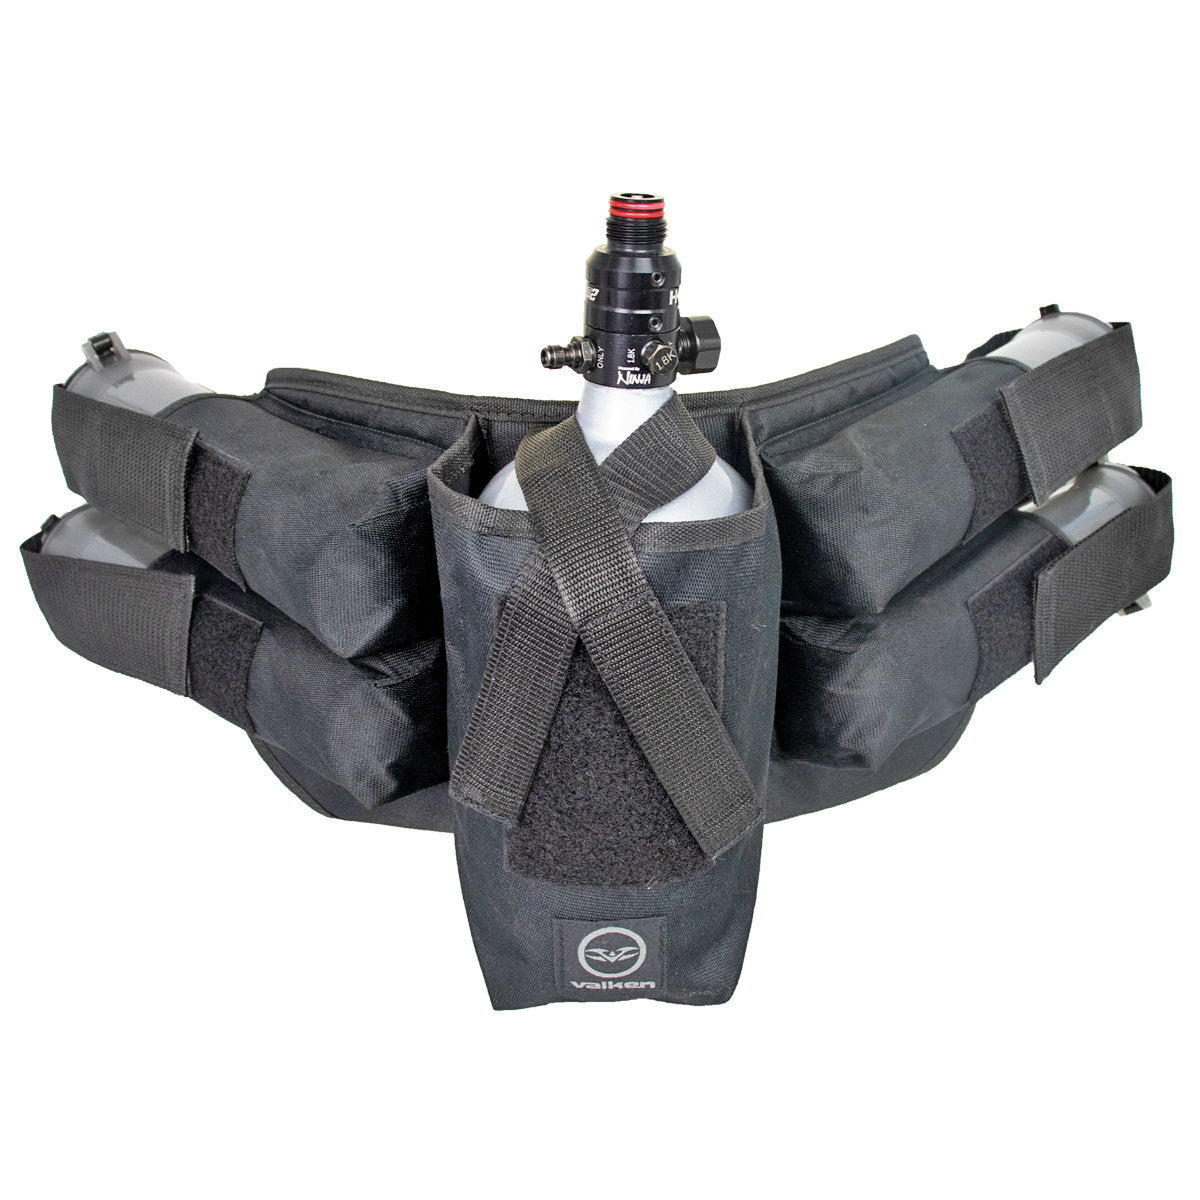 Valken Paintball Harness 4+1 - Black - Eminent Paintball And Airsoft